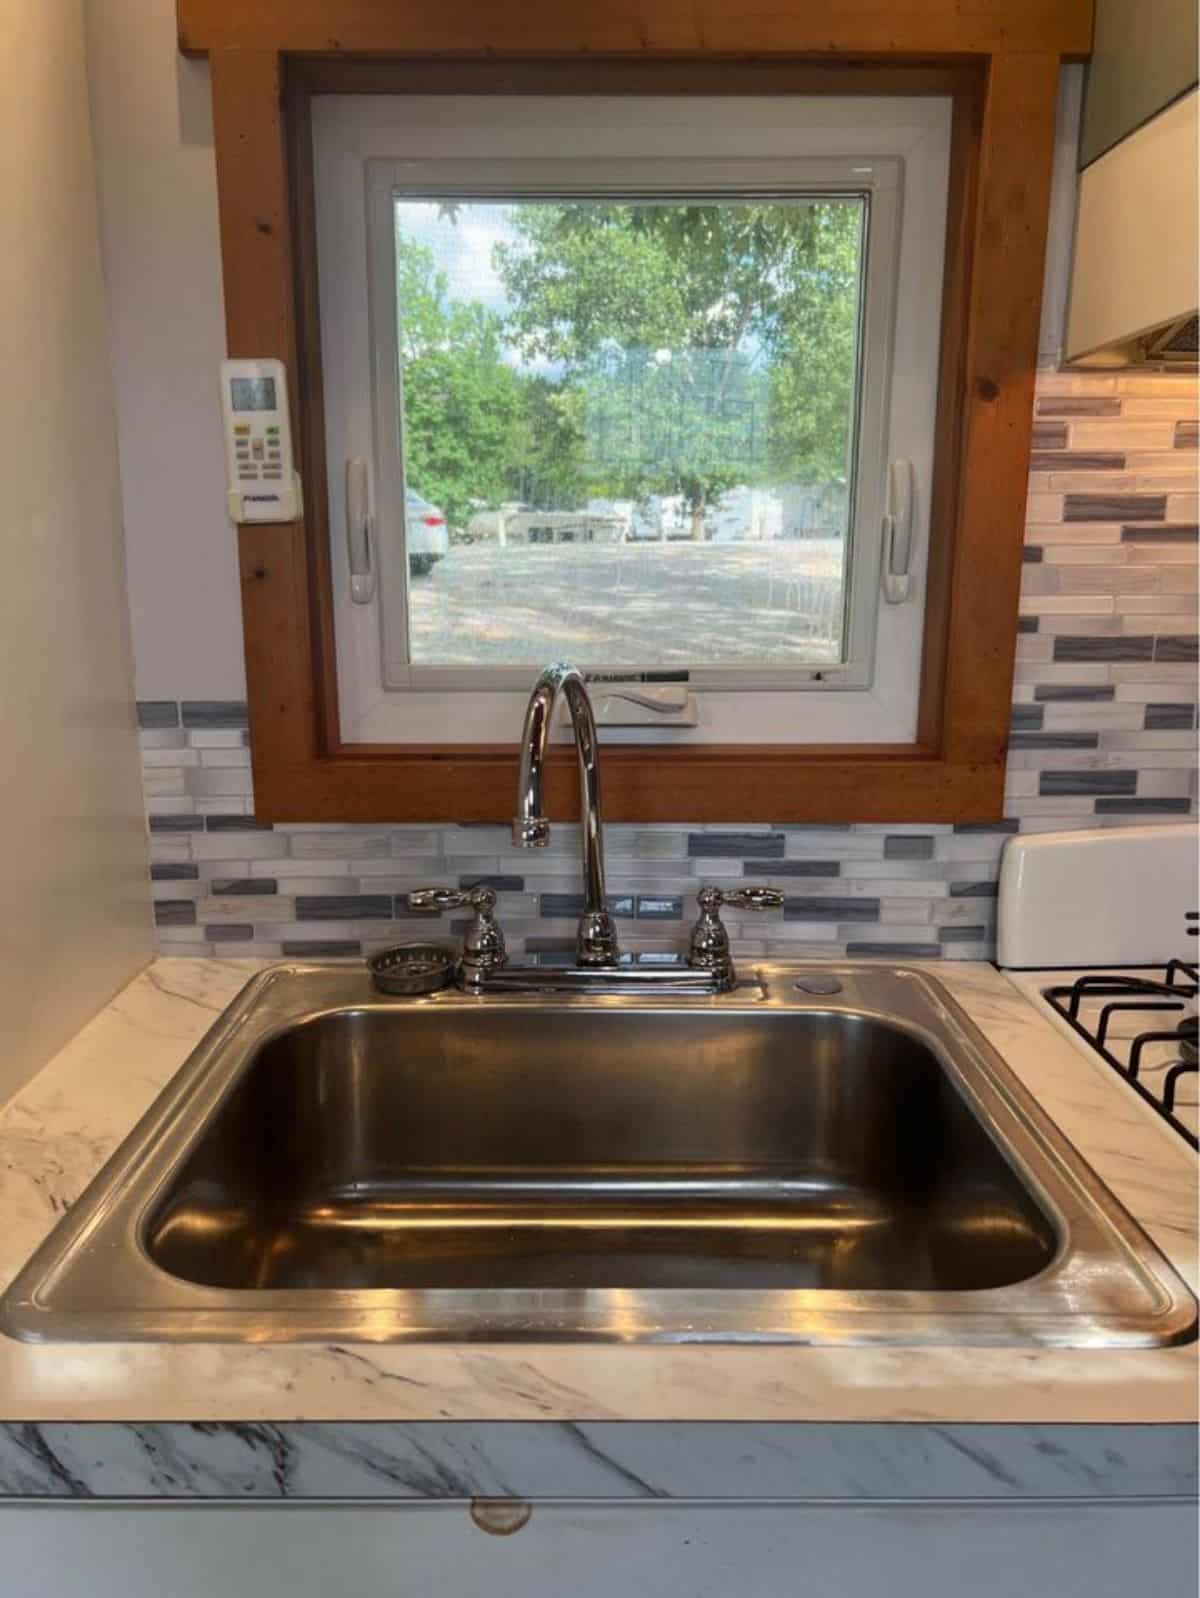 stainless steel sink in kitchen area